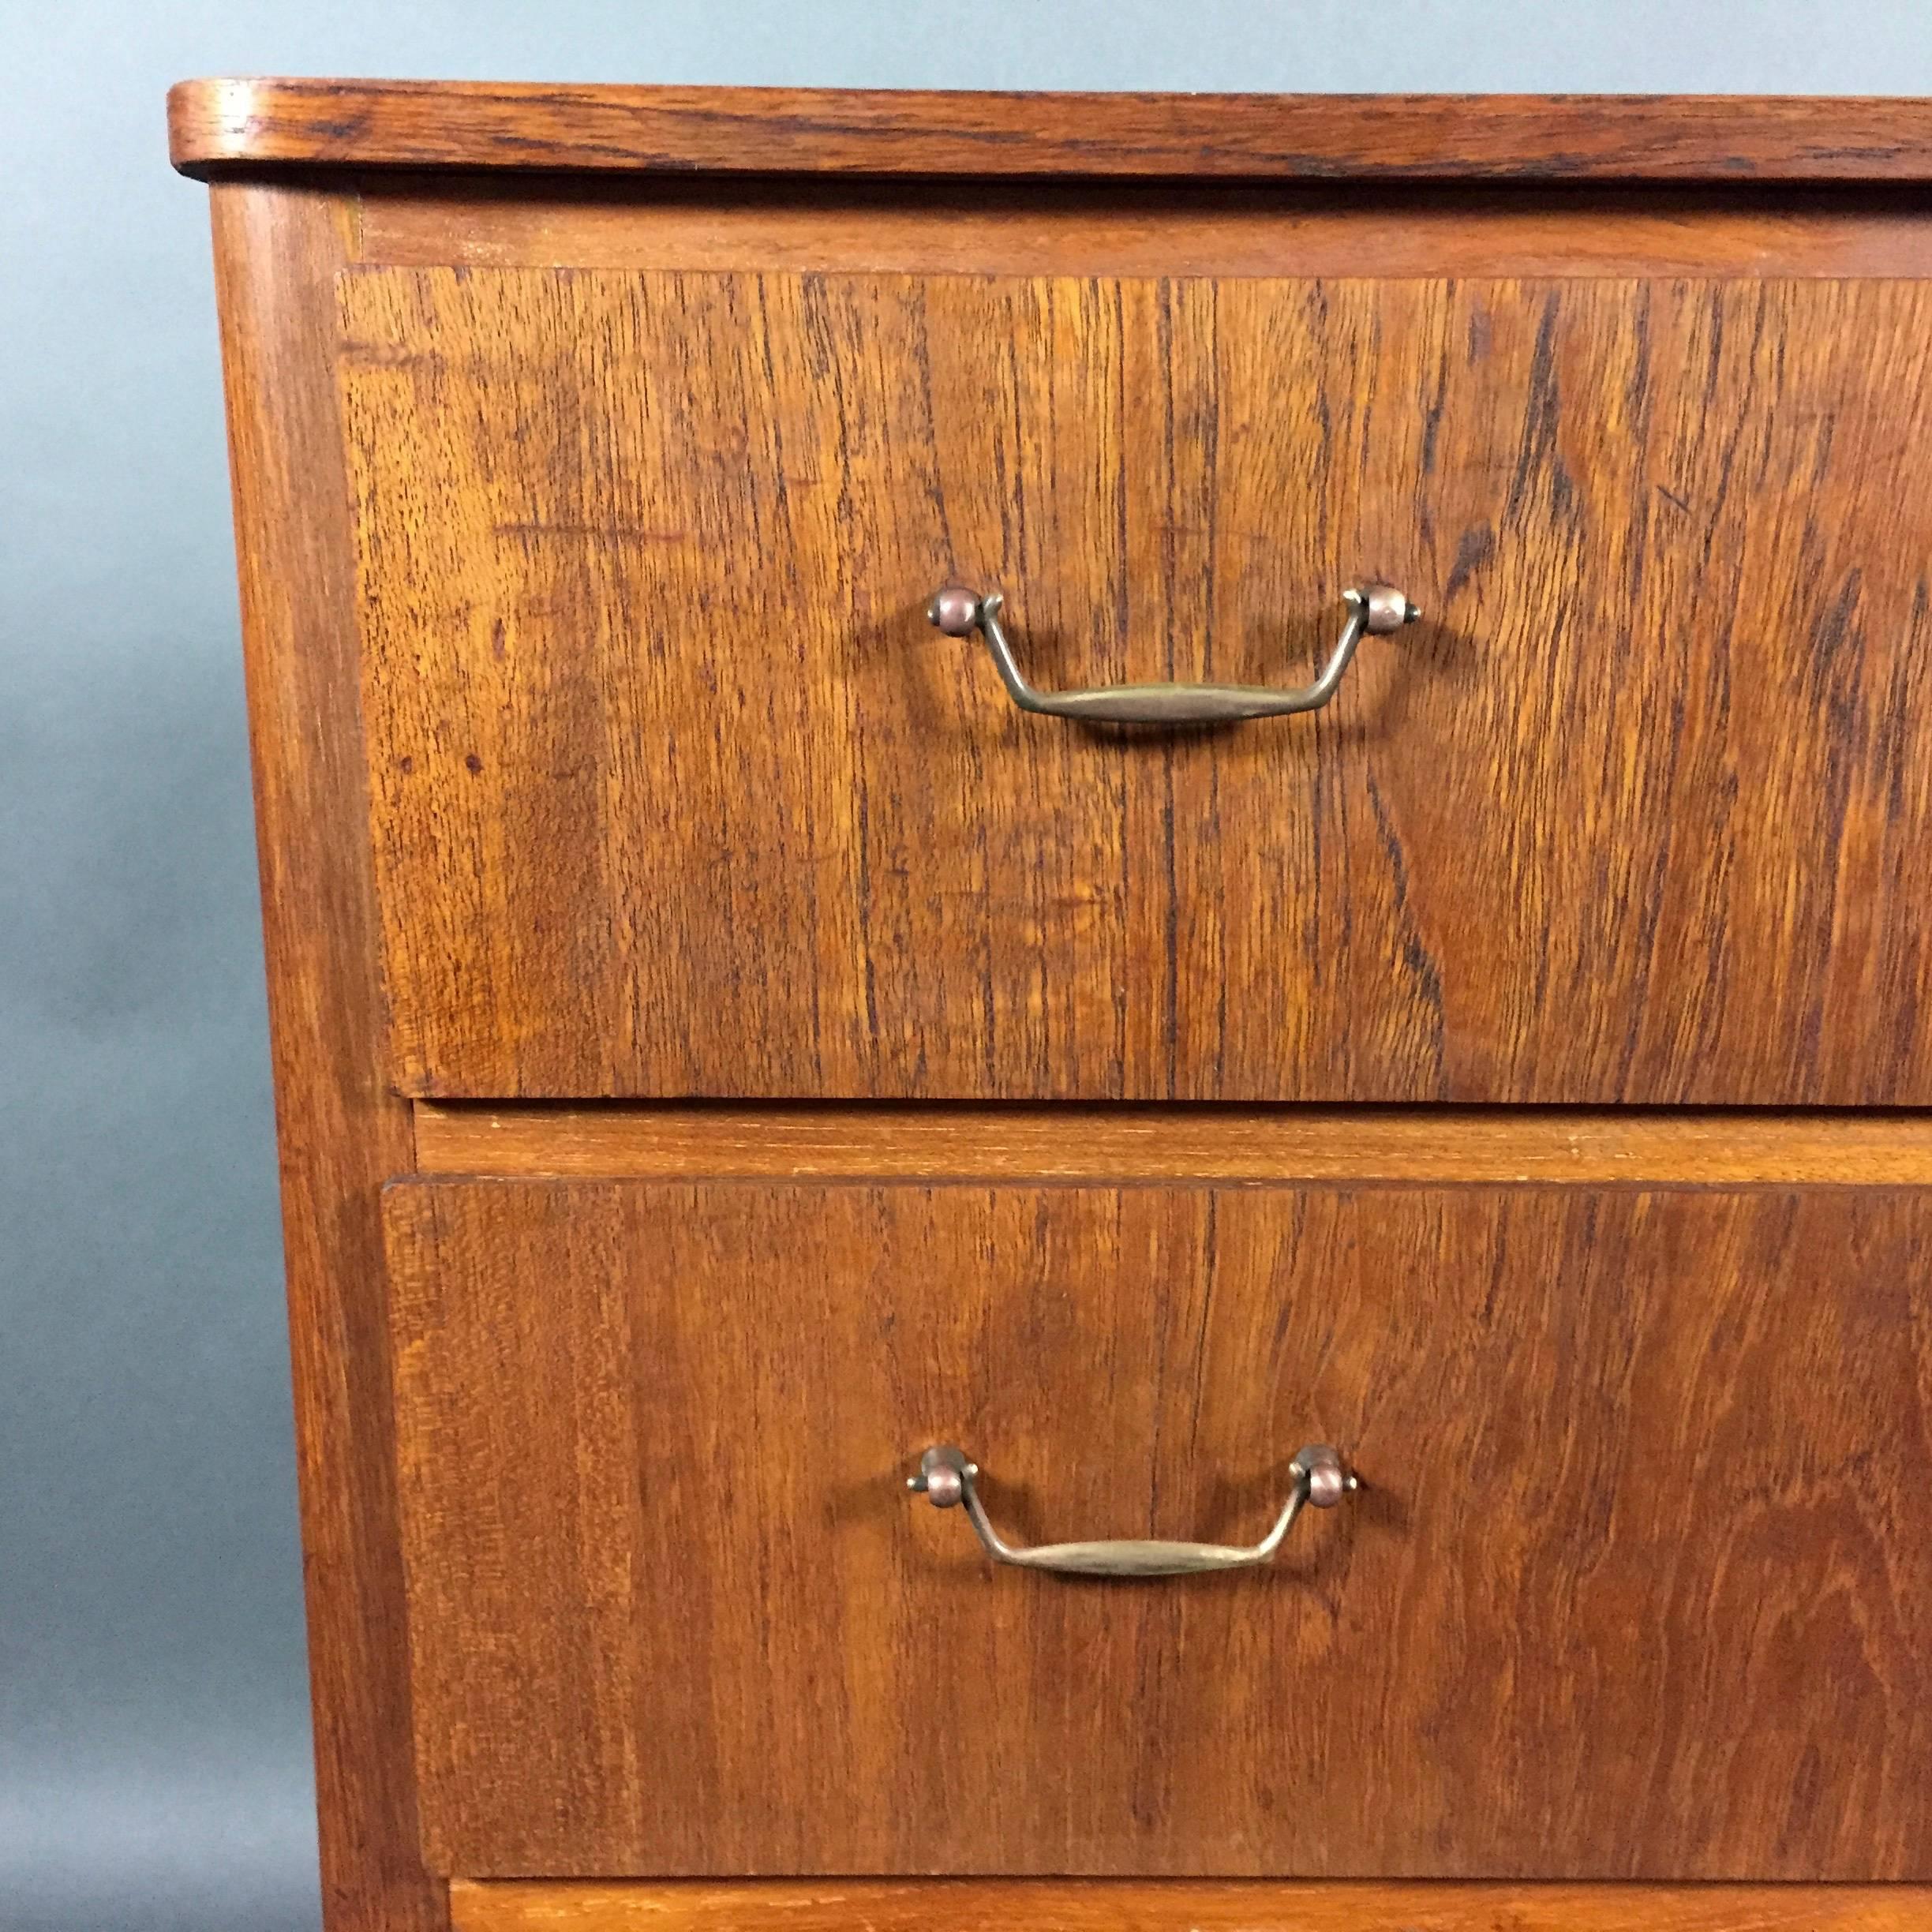 A very sweet four-drawer dressing cabinet veneered in a light wood with original brass drawer pulls and center locks. Likely Swedish, circa 1950s. No key.